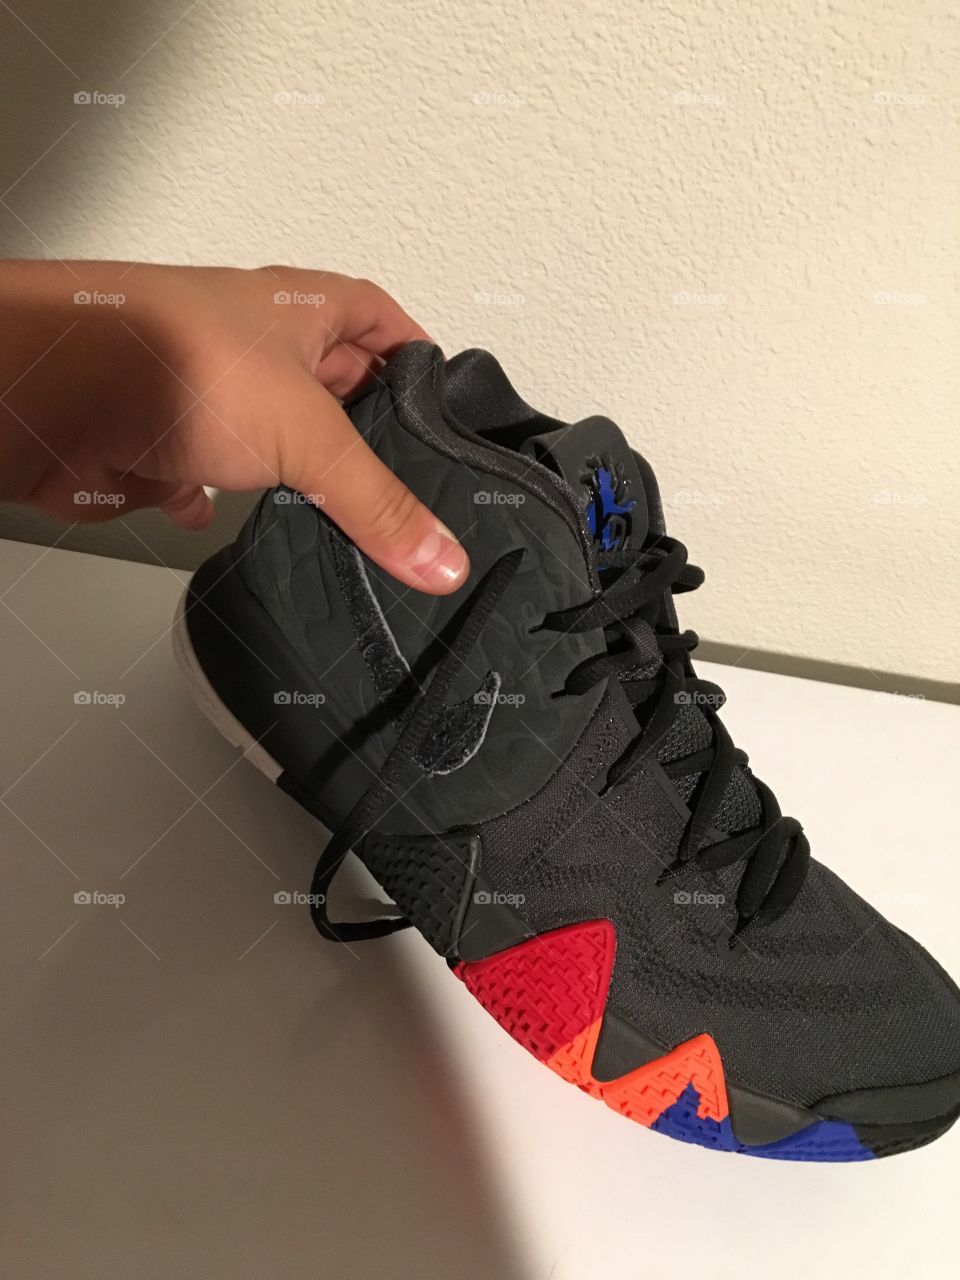 Ball is life just got new kyrie 4 